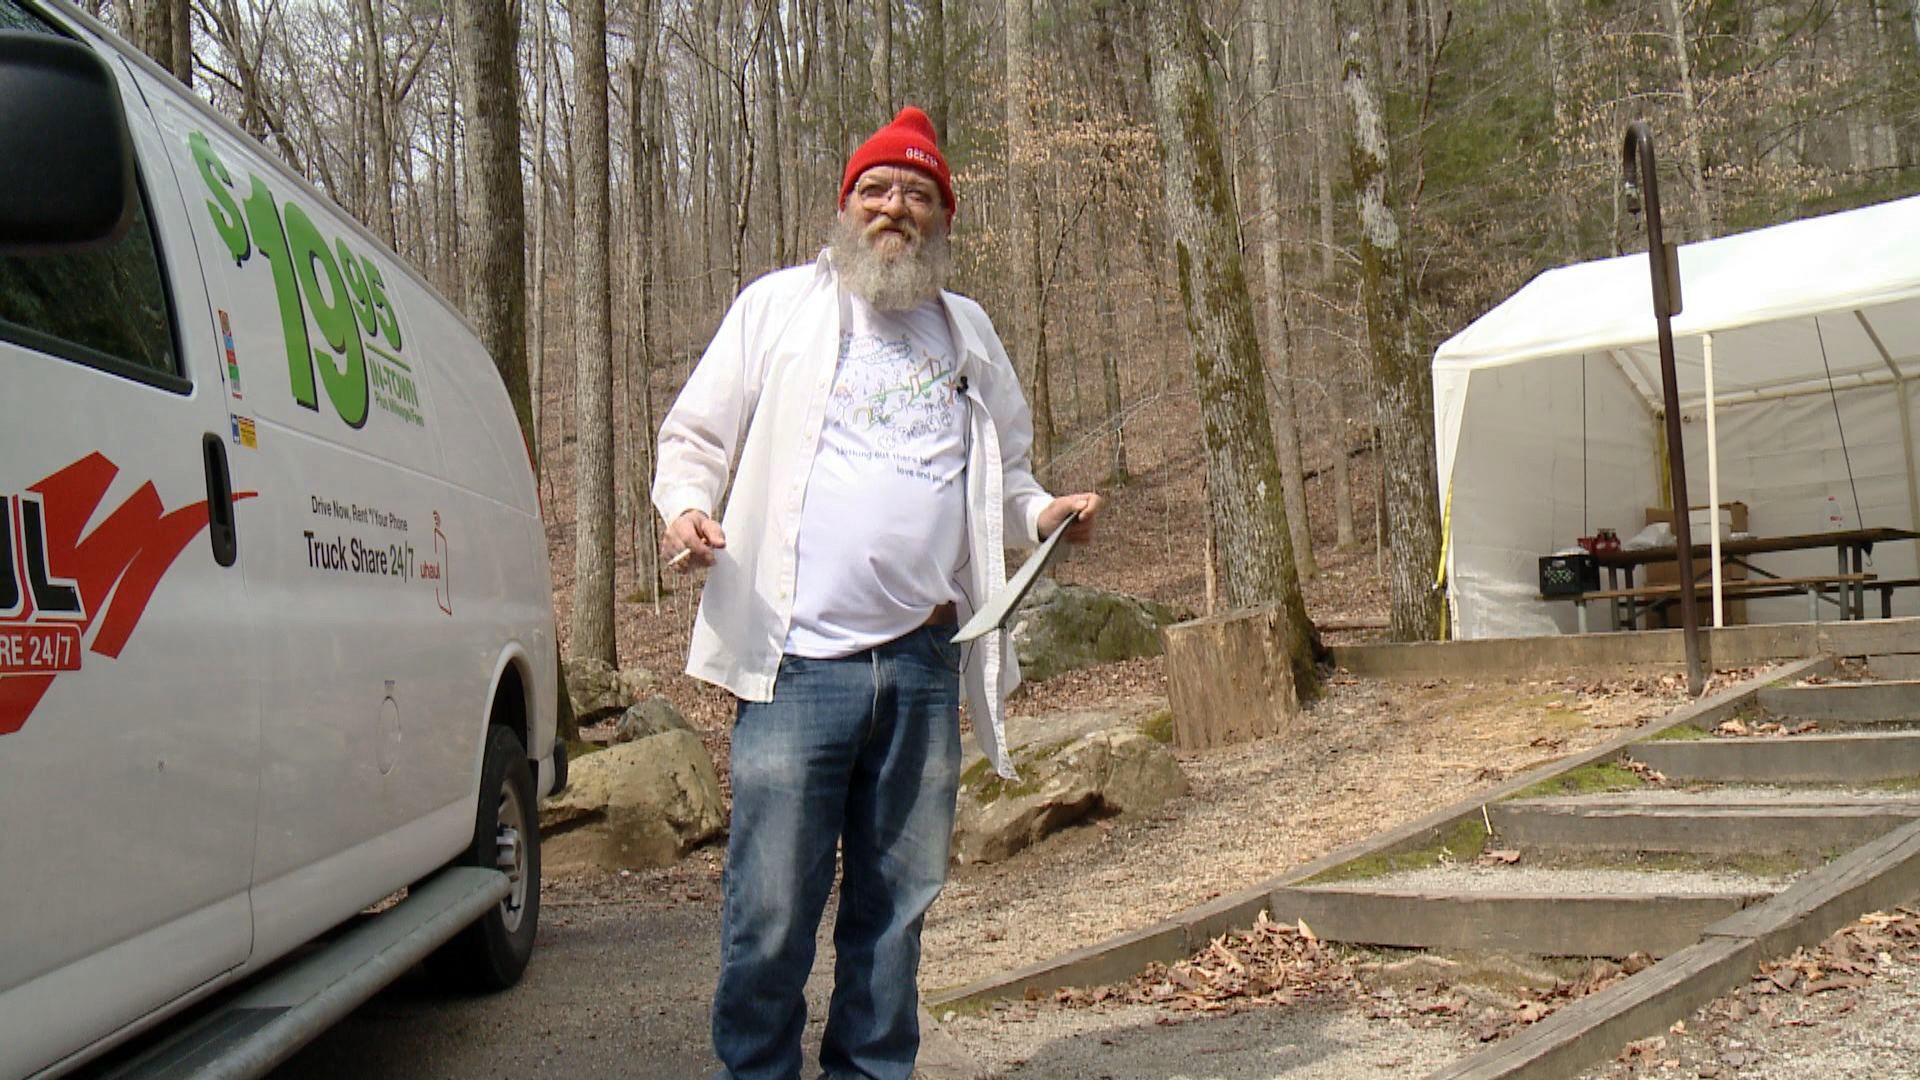 Some of the world's best runners are in Morgan County for this weekend's Barkley Marathons, a brutal 100-mile race that only 15 people have finished in 33 years.